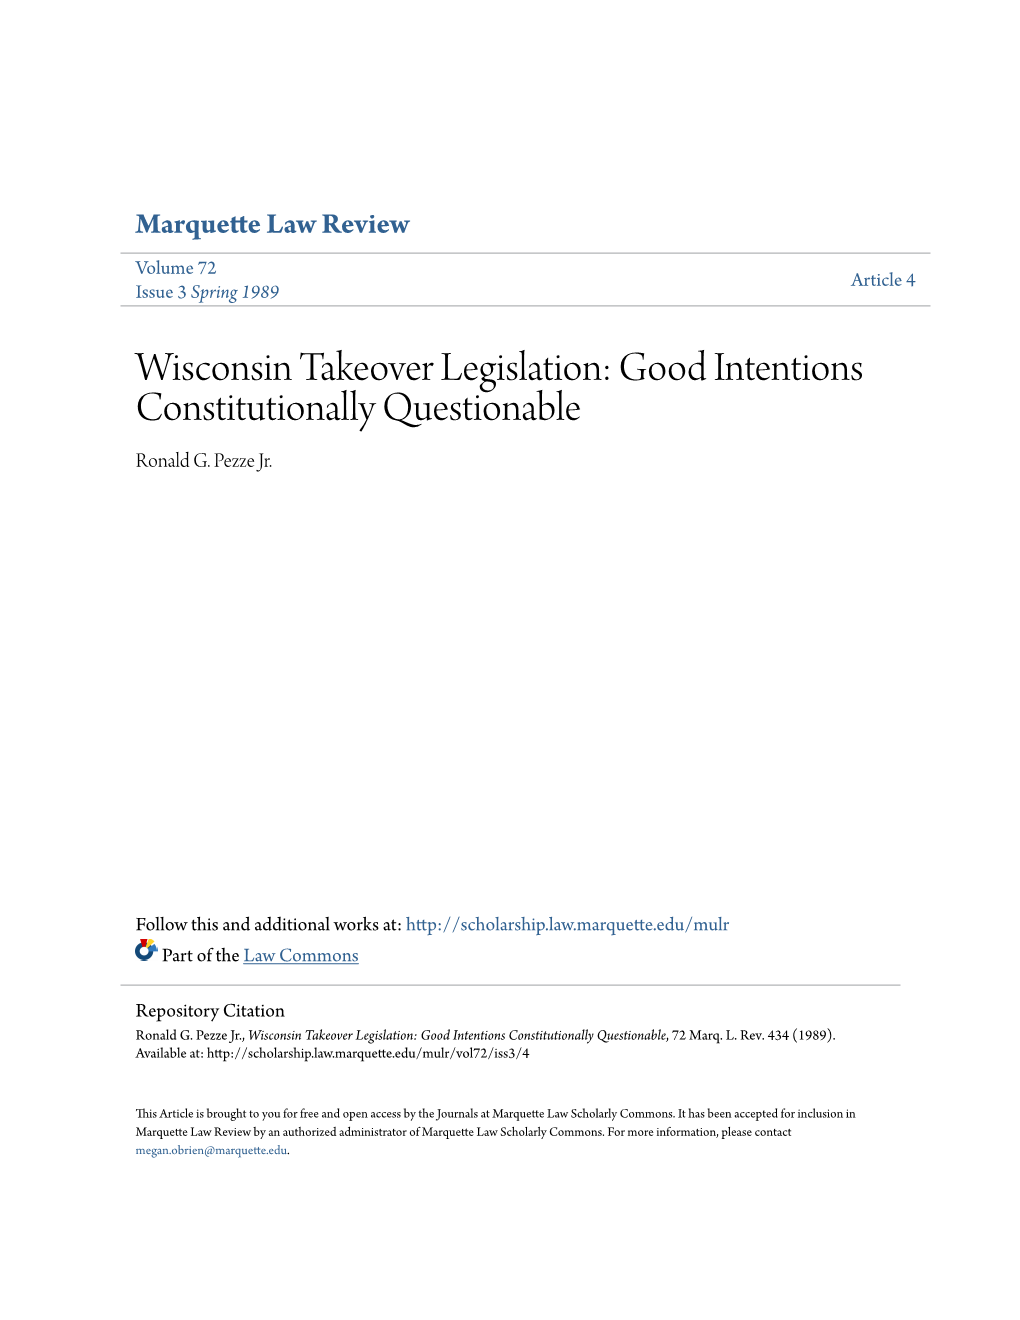 Wisconsin Takeover Legislation: Good Intentions Constitutionally Questionable Ronald G